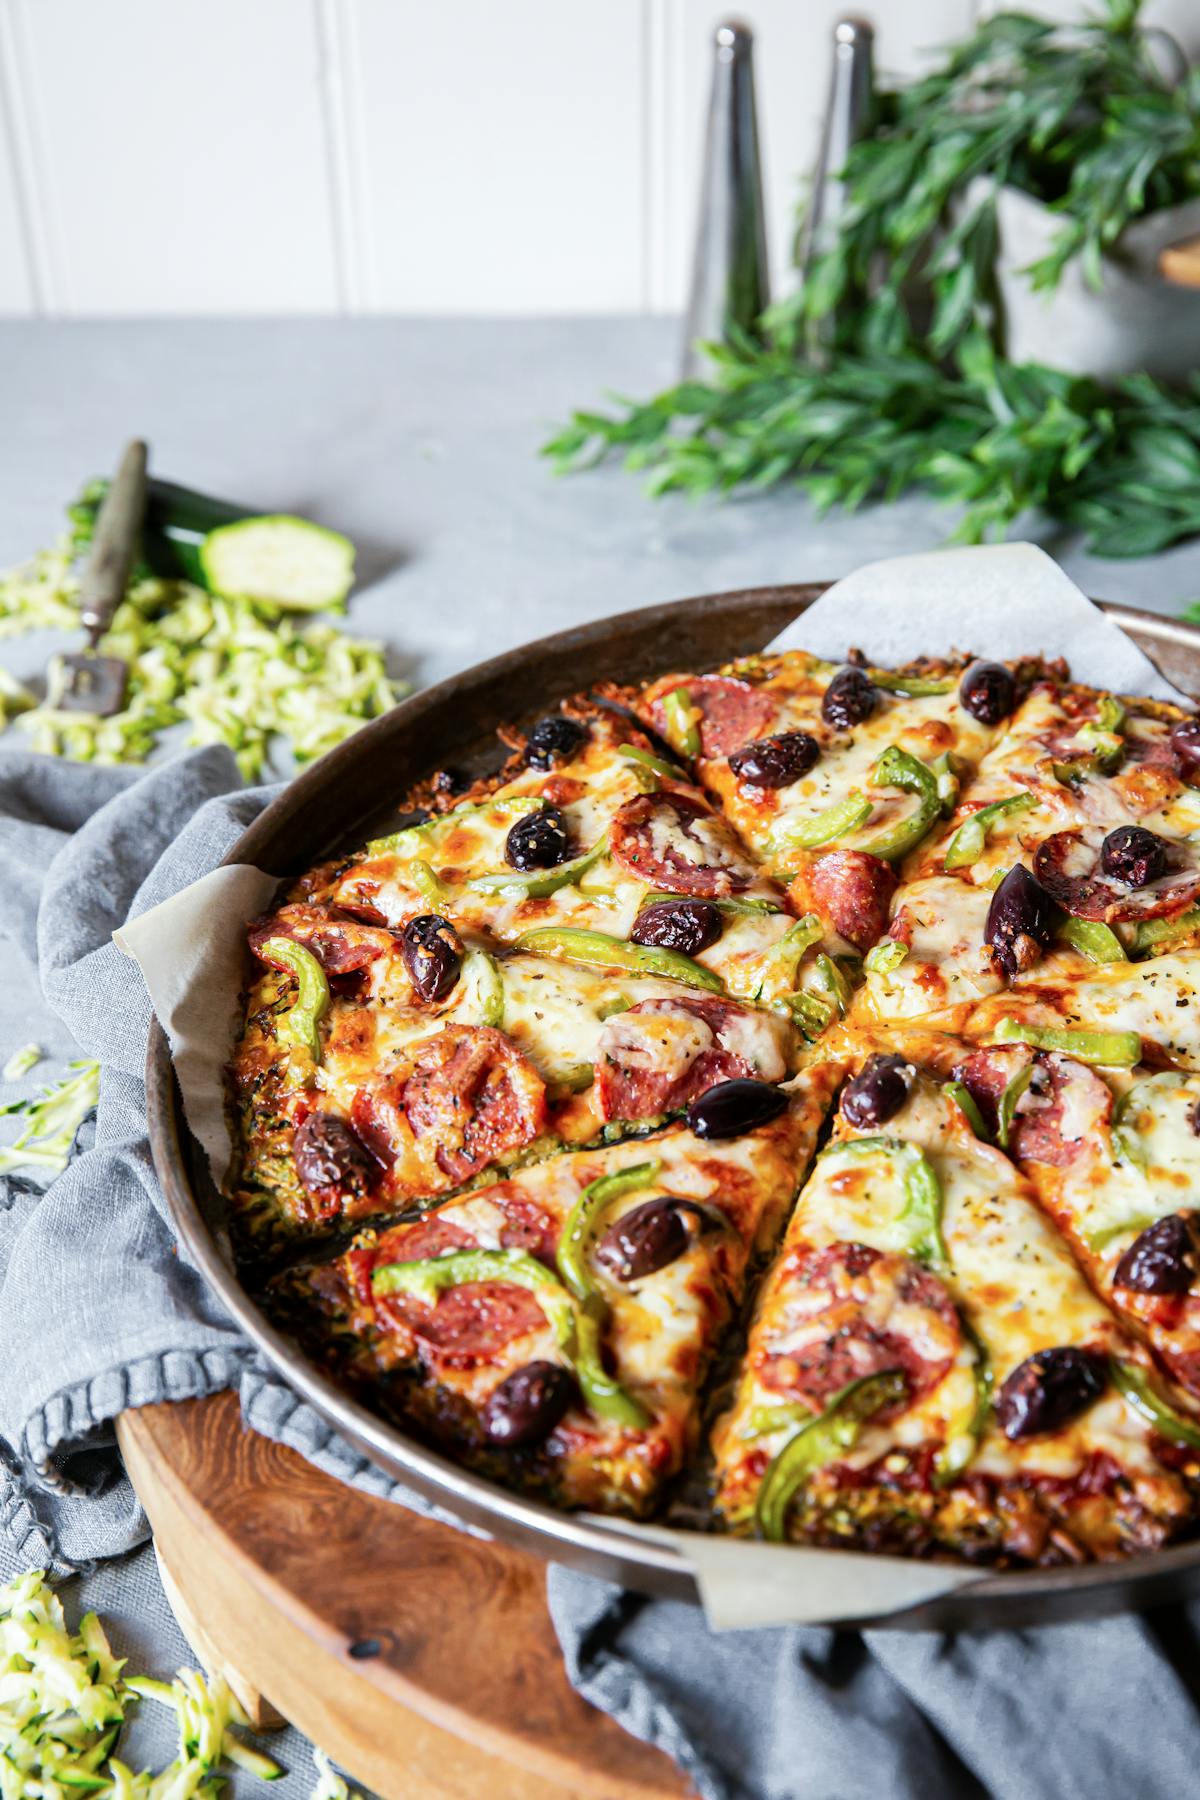 Low-carb zucchini pizza with pepperoni